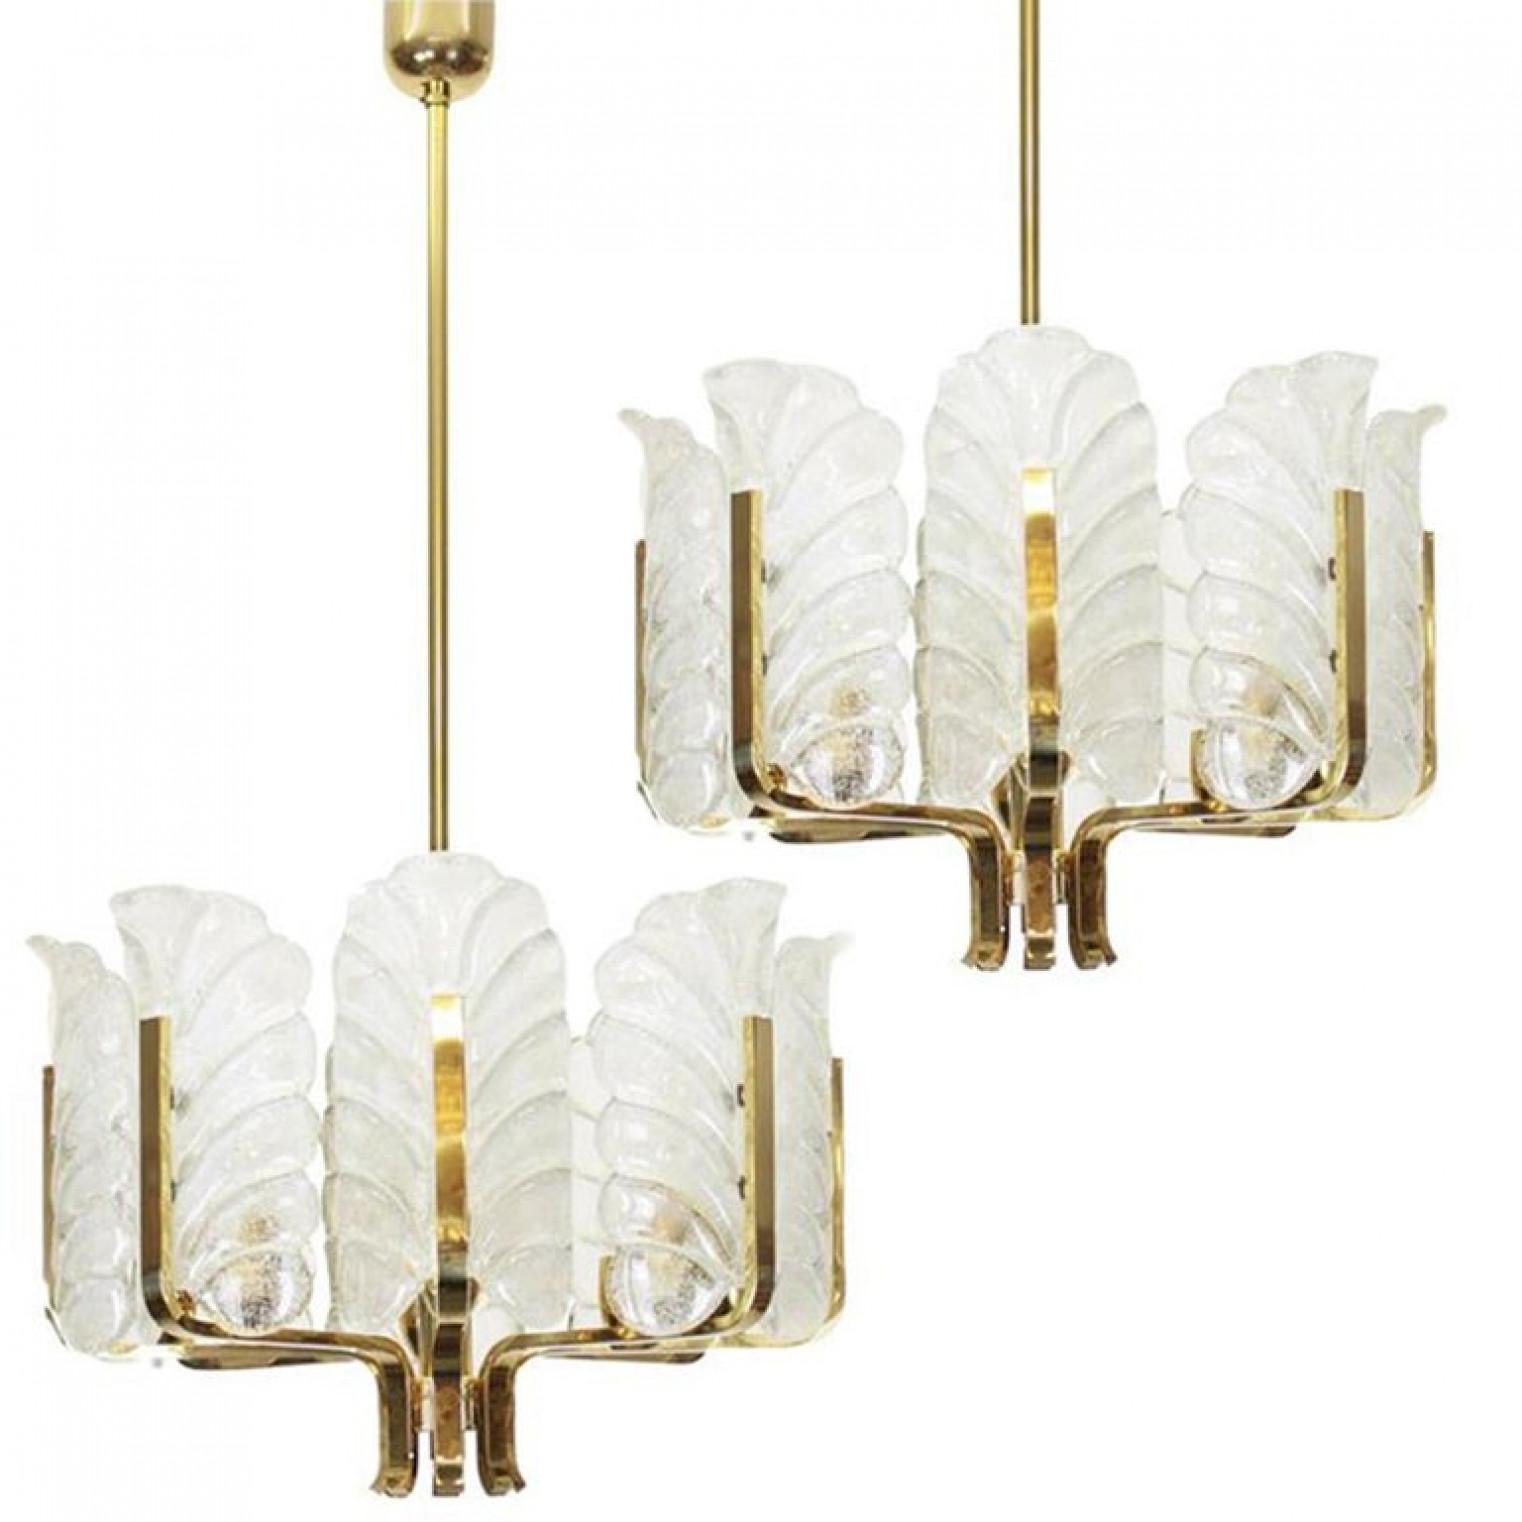 1 of the 5 Pair of Brass Wall Scones by Fagerlund for Orrefors, 1960 3